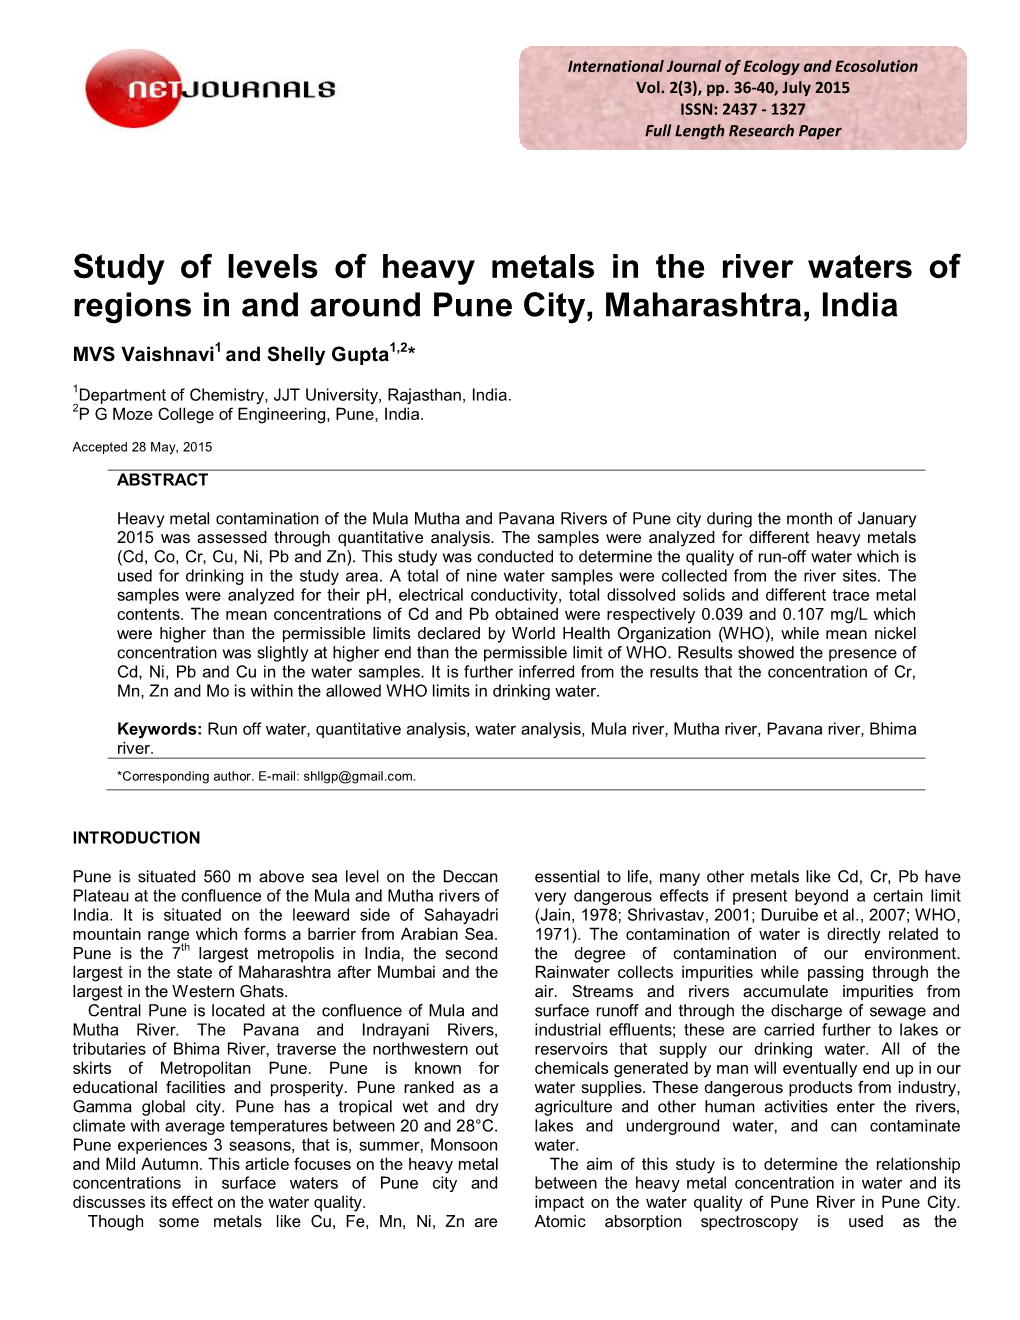 Study of Levels of Heavy Metals in the River Waters of Regions in and Around Pune City, Maharashtra, India